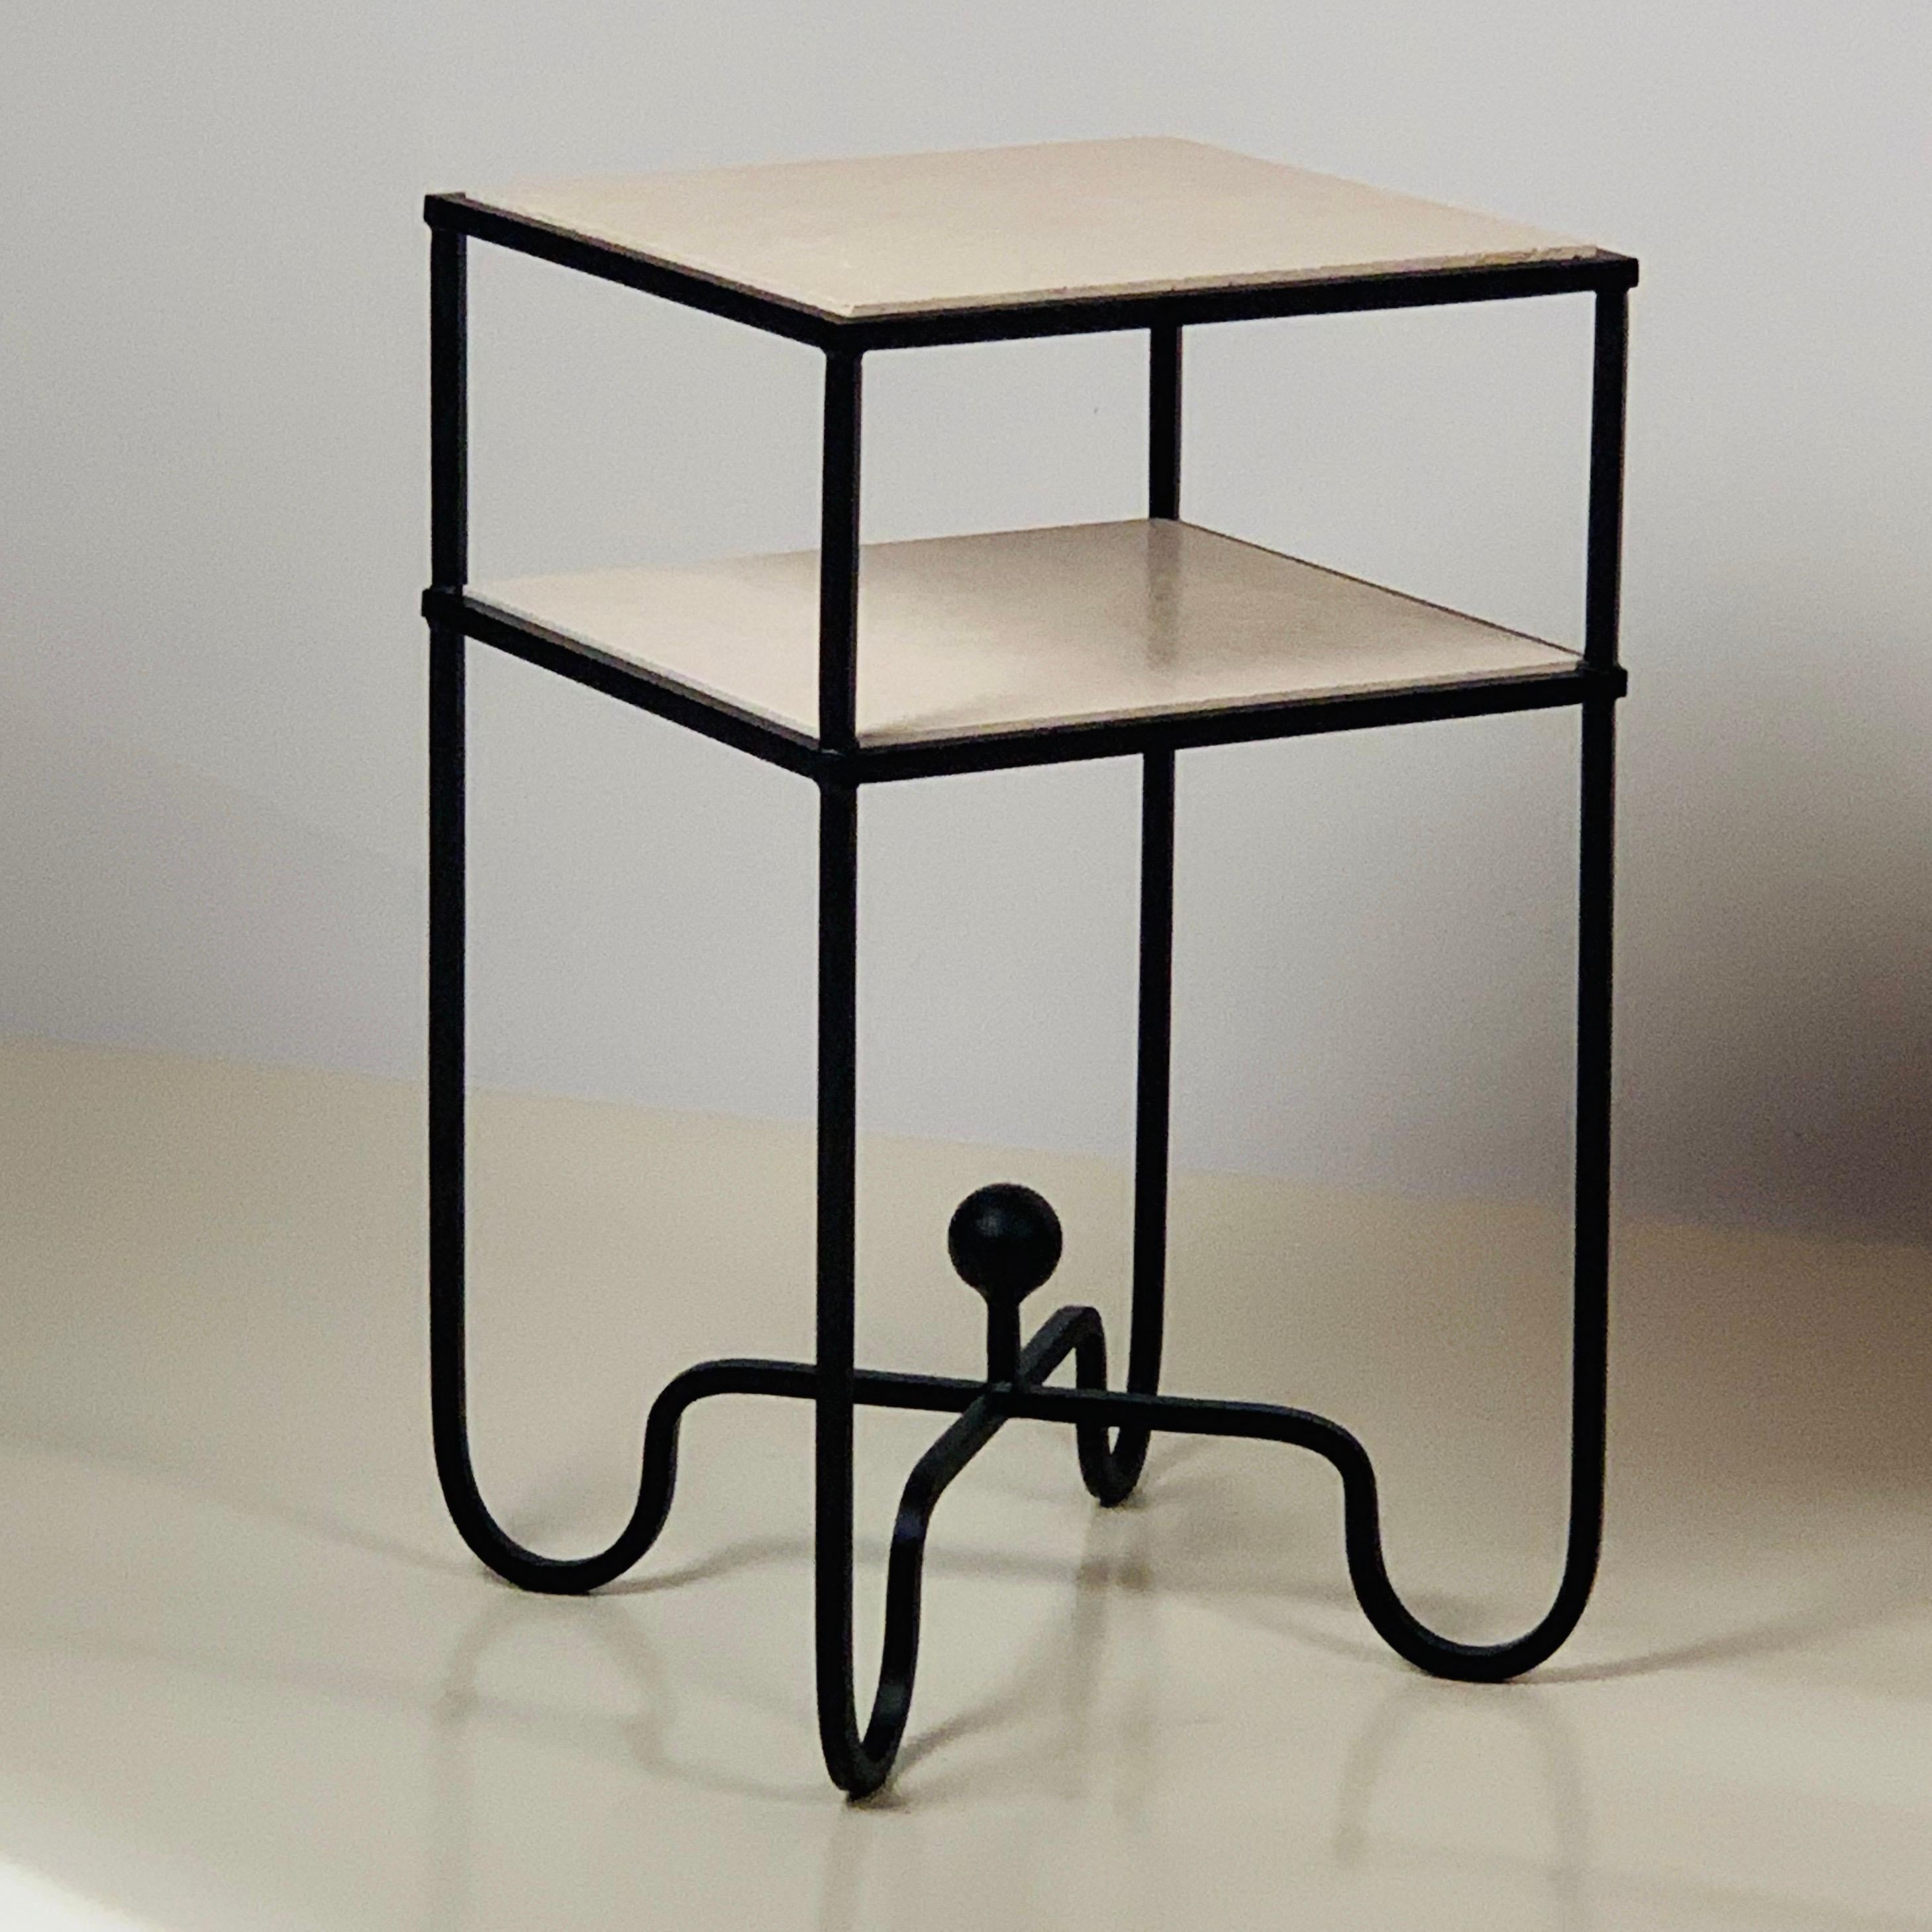 2-tier 'Entretoise' side table by Design Frères. Wrought iron base with 2 thin travertine shelves. Shelves are removable for secure shipping and cleaning.